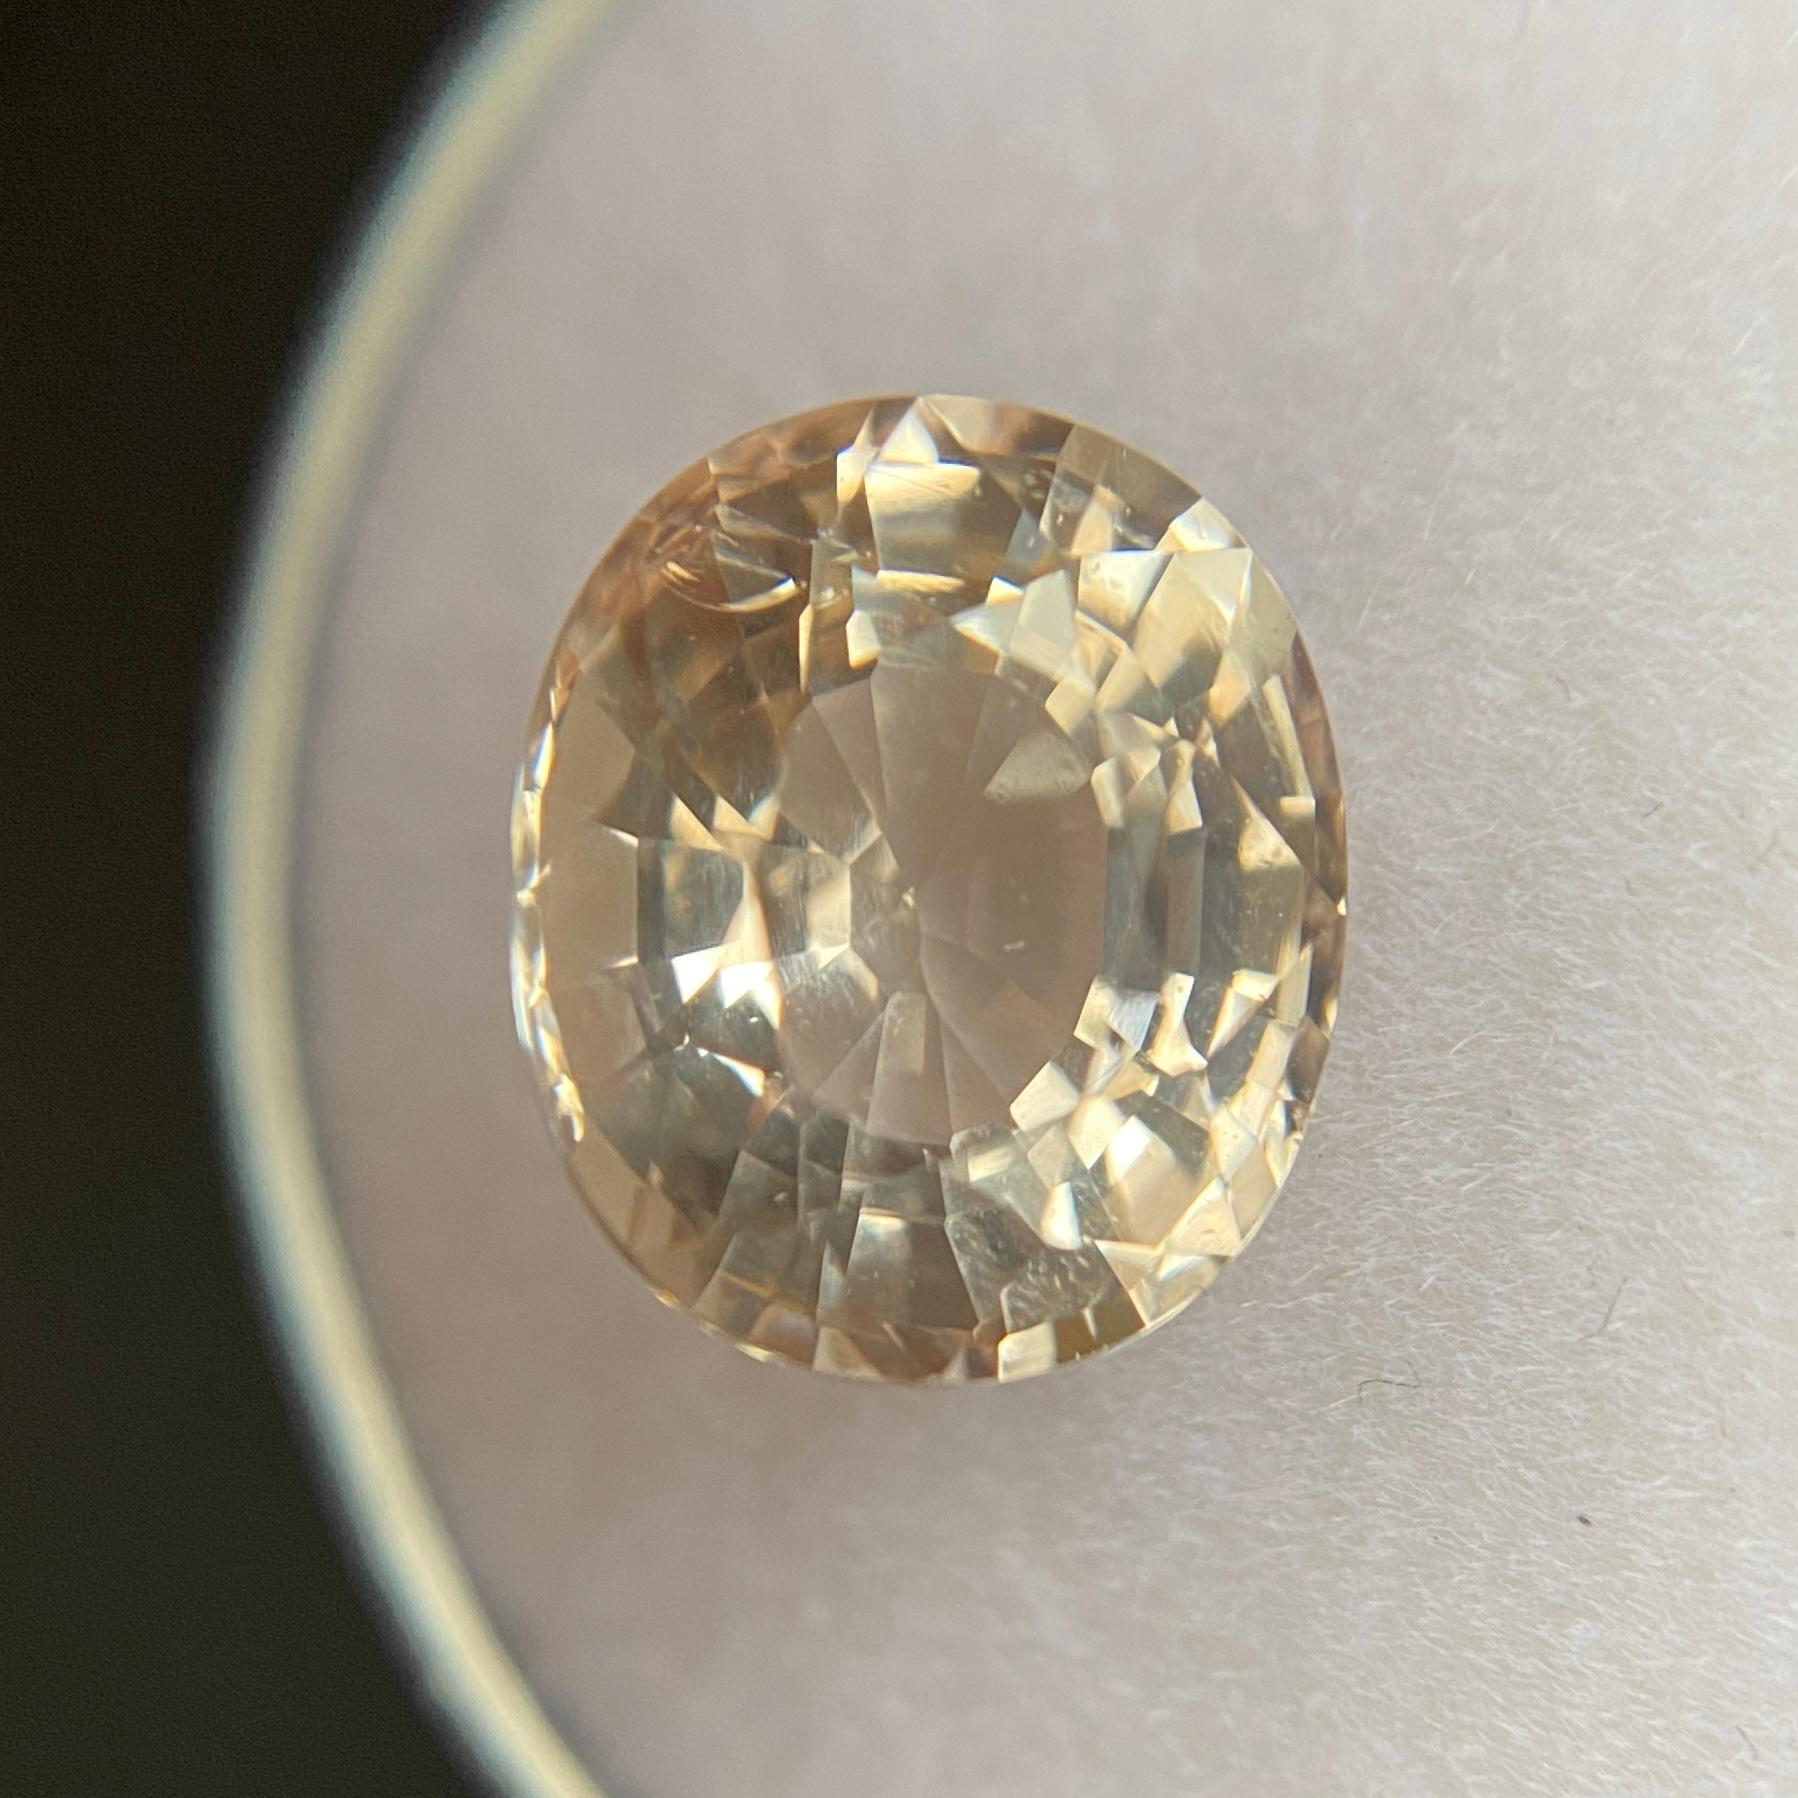 Fine Natural Morganite Gemstone.
 
3.55 Carat with a beautiful pink orange (peach) colour and excellent clarity. Very clean stone.
 
Also has an excellent oval cut with good proportions and symmetry with an ideal polish to show great shine and